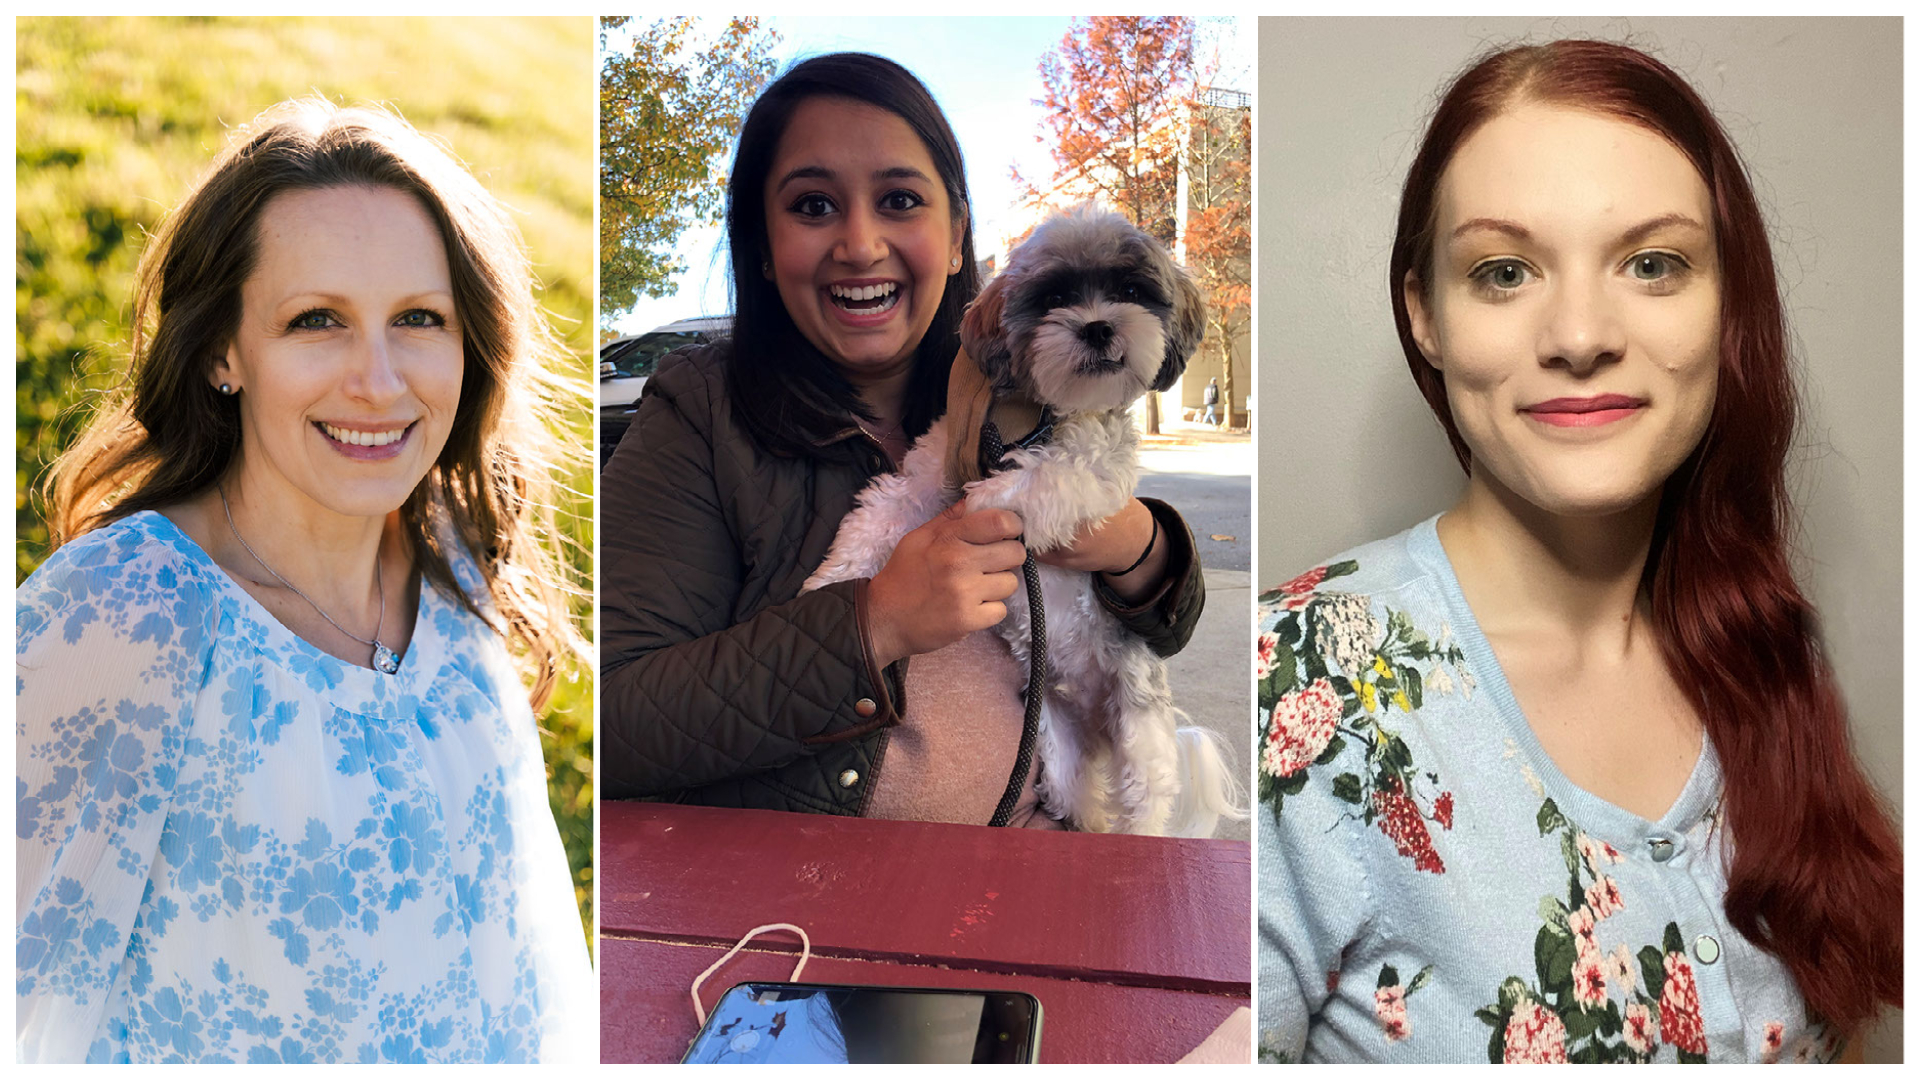 A psychiatry residency program at Atrium Health is giving students the personalized attention and diverse clinical training needed to make a difference in the community. Meet 3 graduates who are passionate about helping patients heal while prioritizing their mental health.  